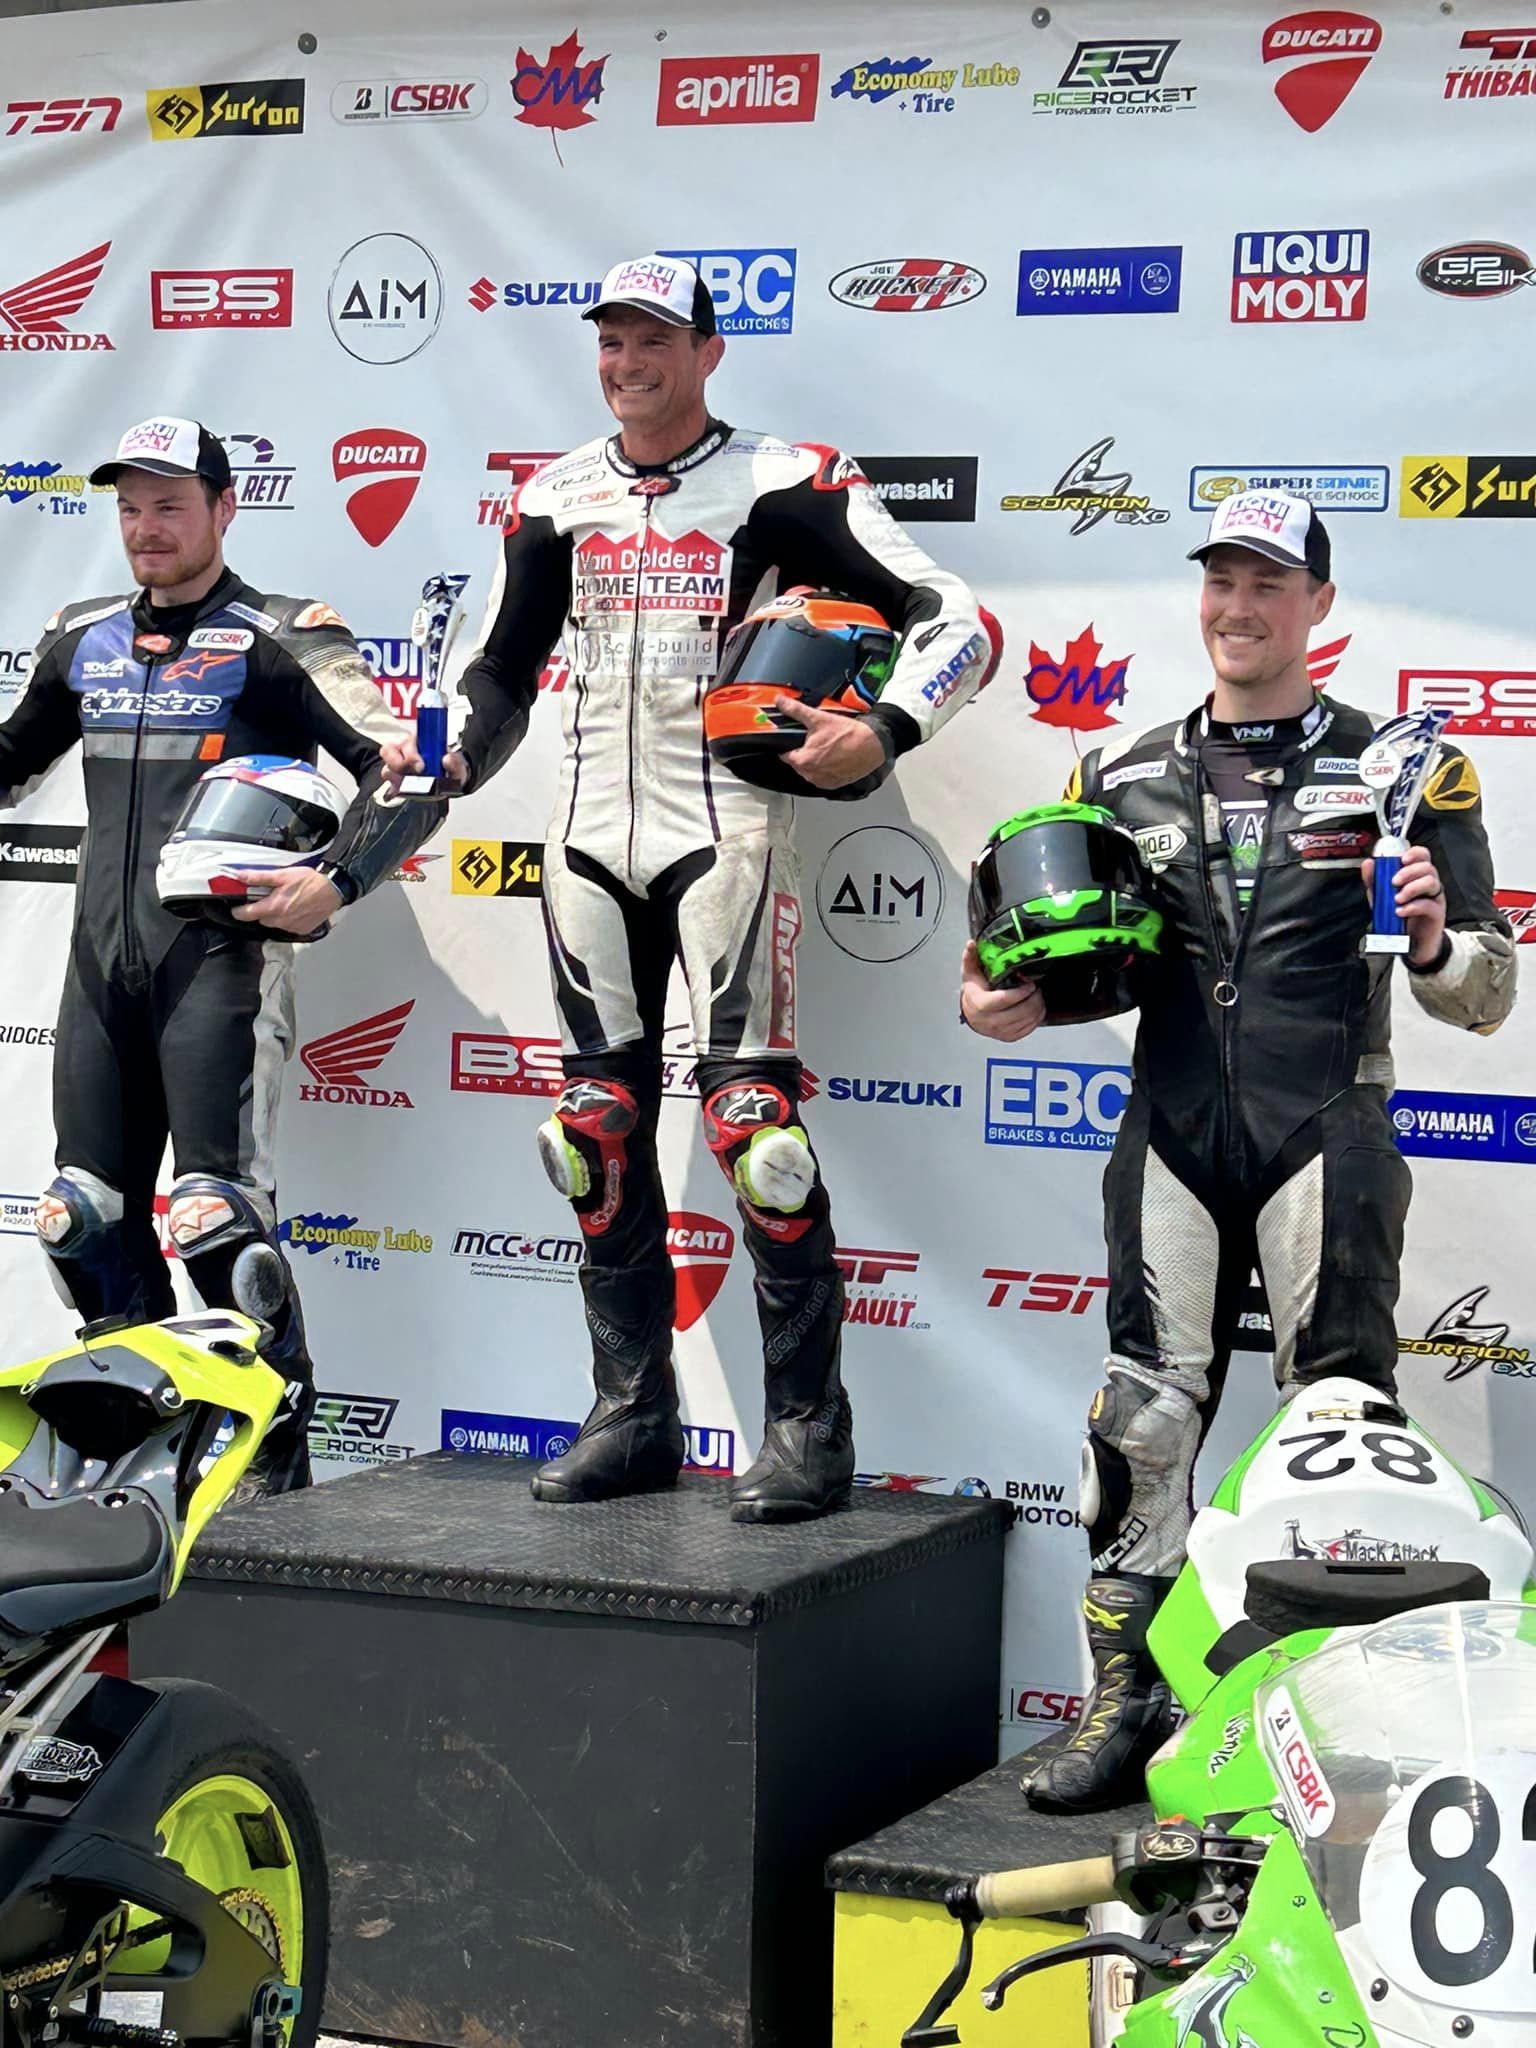 Congratulations to DP Brakes sponsored riders Brad MacRae and David MacKay on finishing 1st and 3rd at today’s Bridgestone Canadian Superbike Championship Pro Sportbike race at Shannonville Motorsport Park.